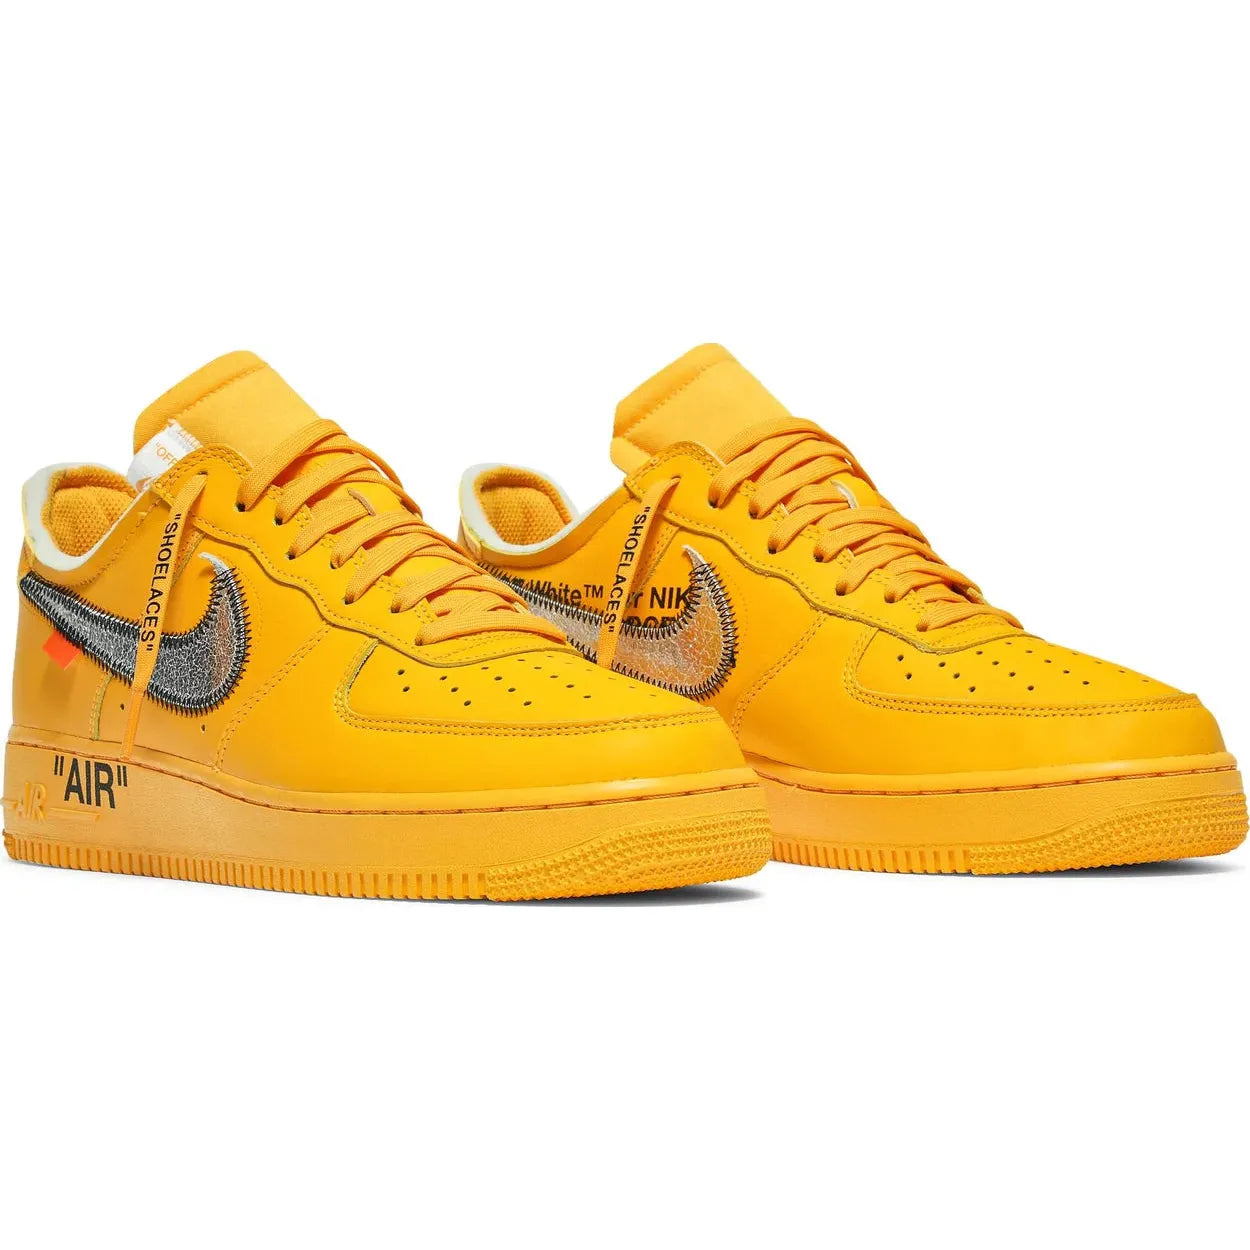 Nike Air Force 1 Low Off-White ICA University Gold by Nike from £1875.00